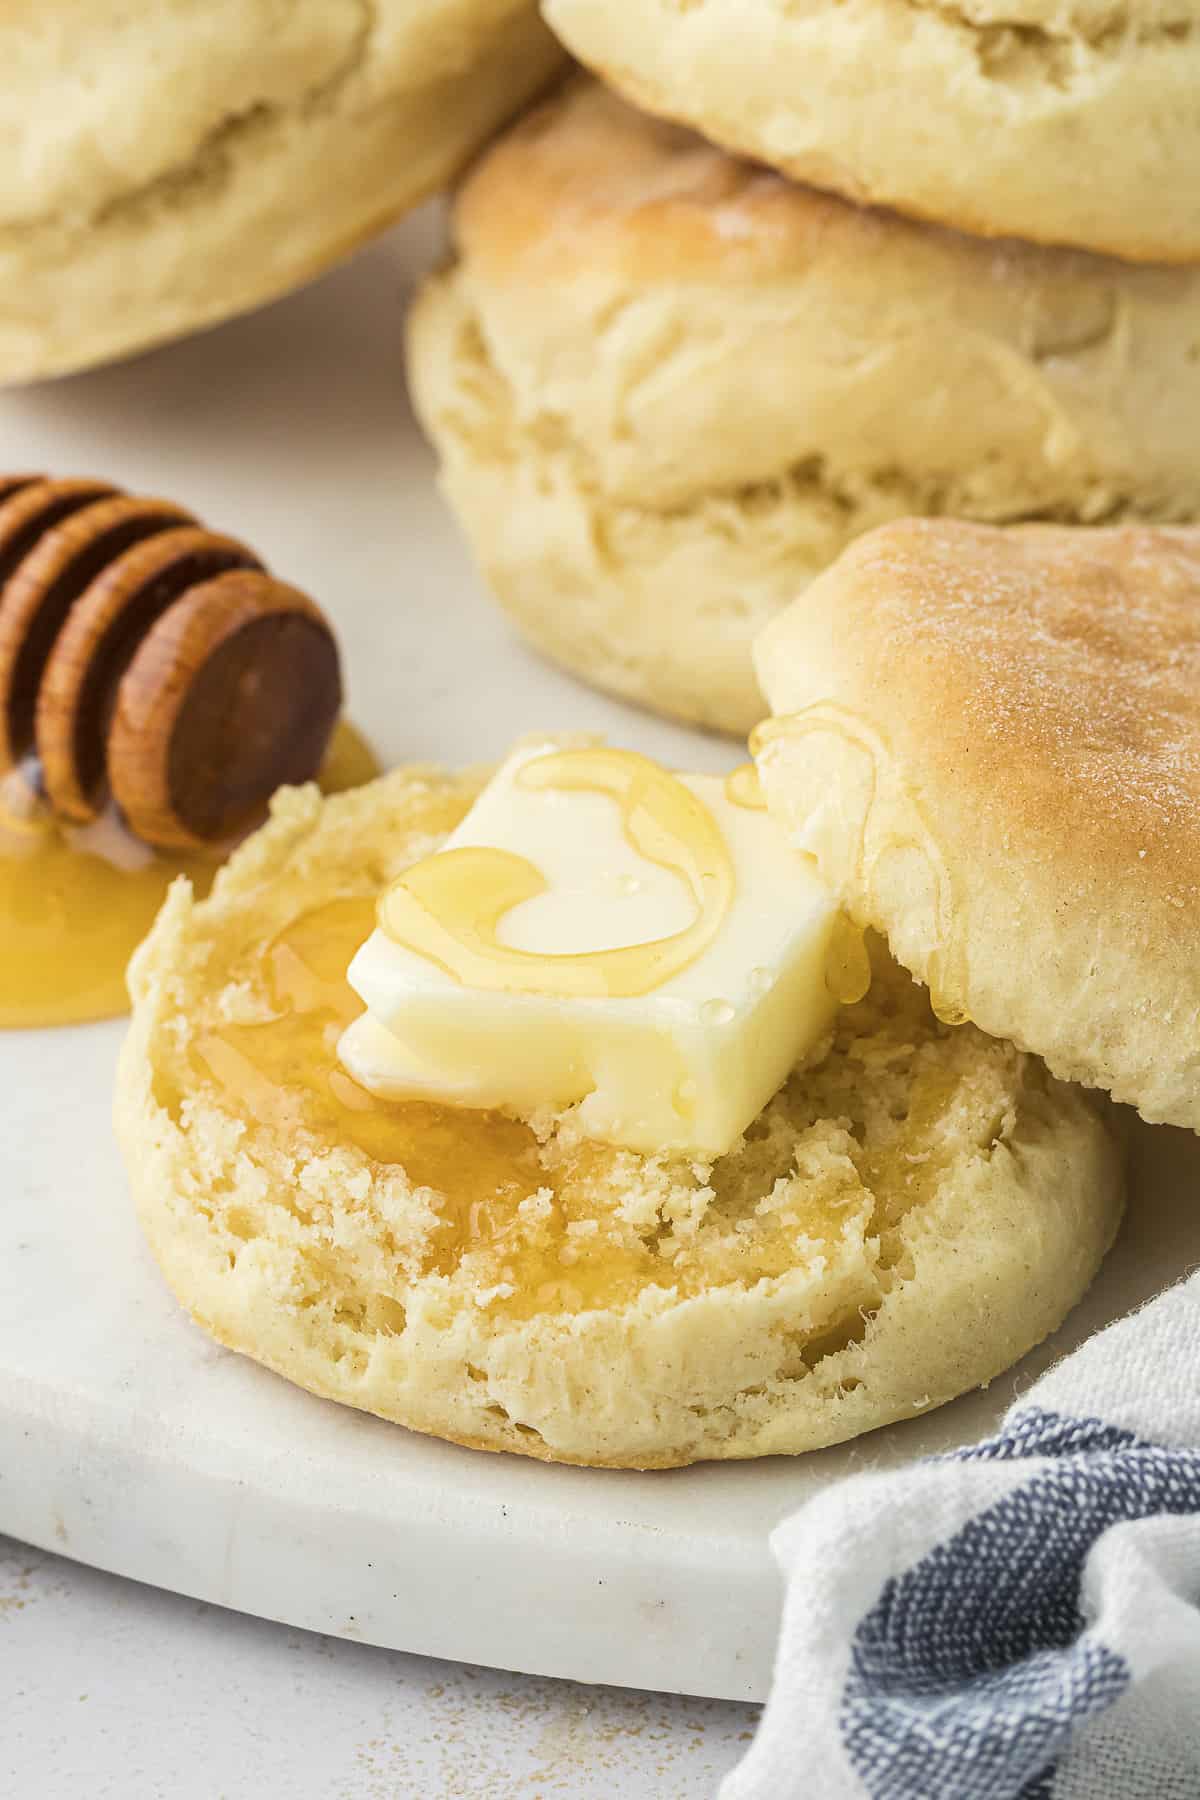 Bisquick biscuit topped with butter and honey.